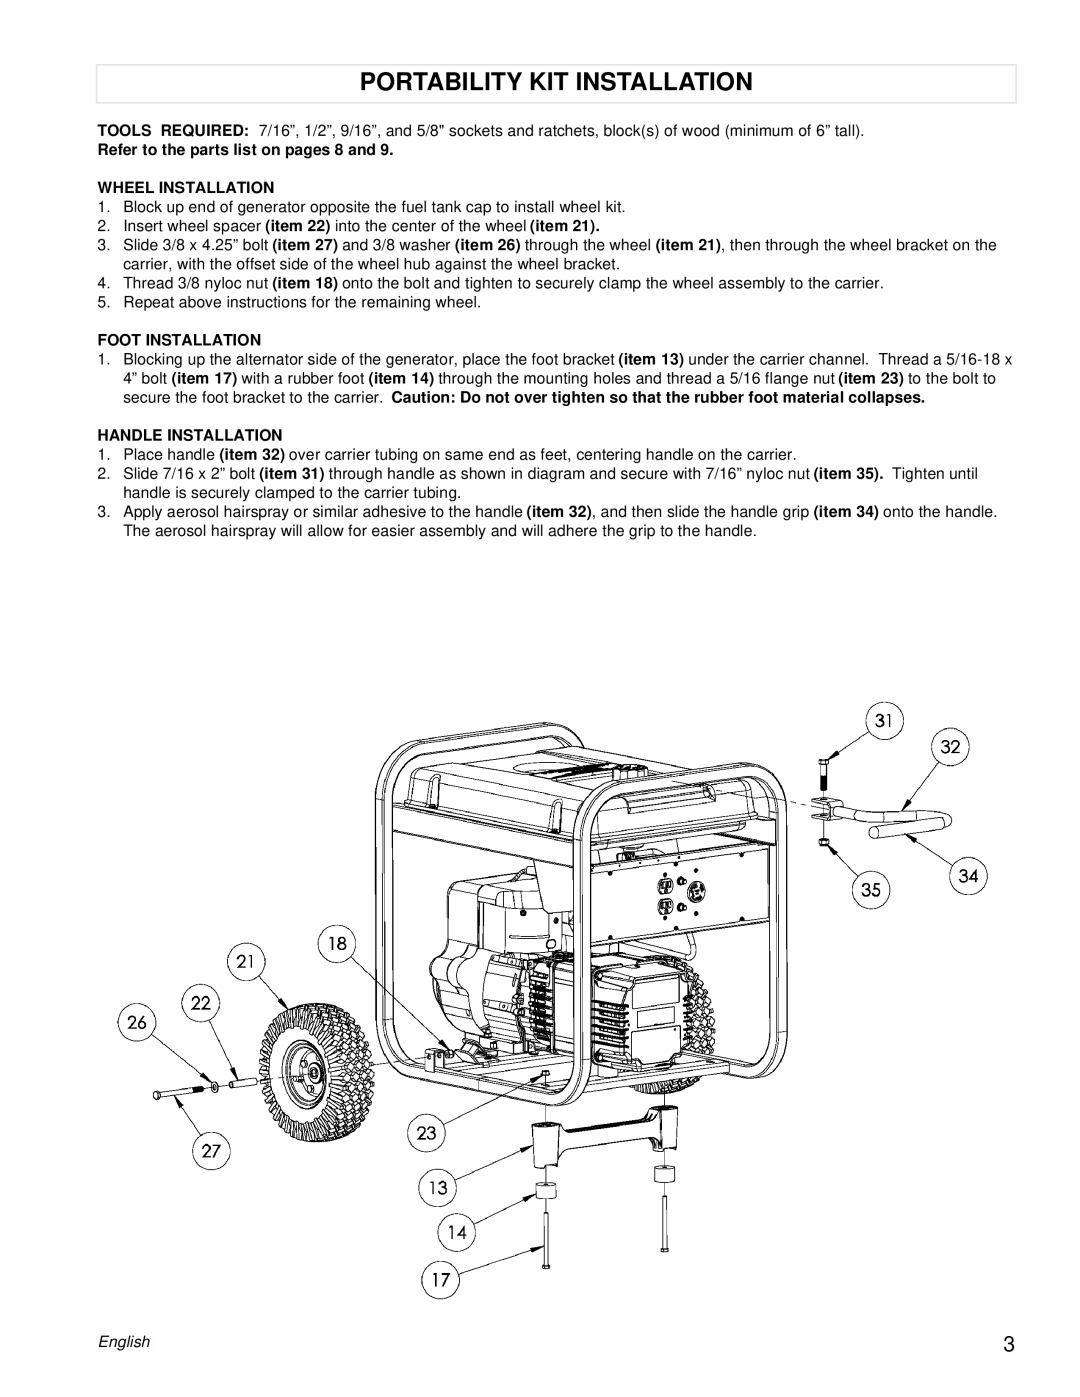 Powermate PM0525303s Portability Kit Installation, Refer to the parts list on pages 8 and, Wheel Installation, English 